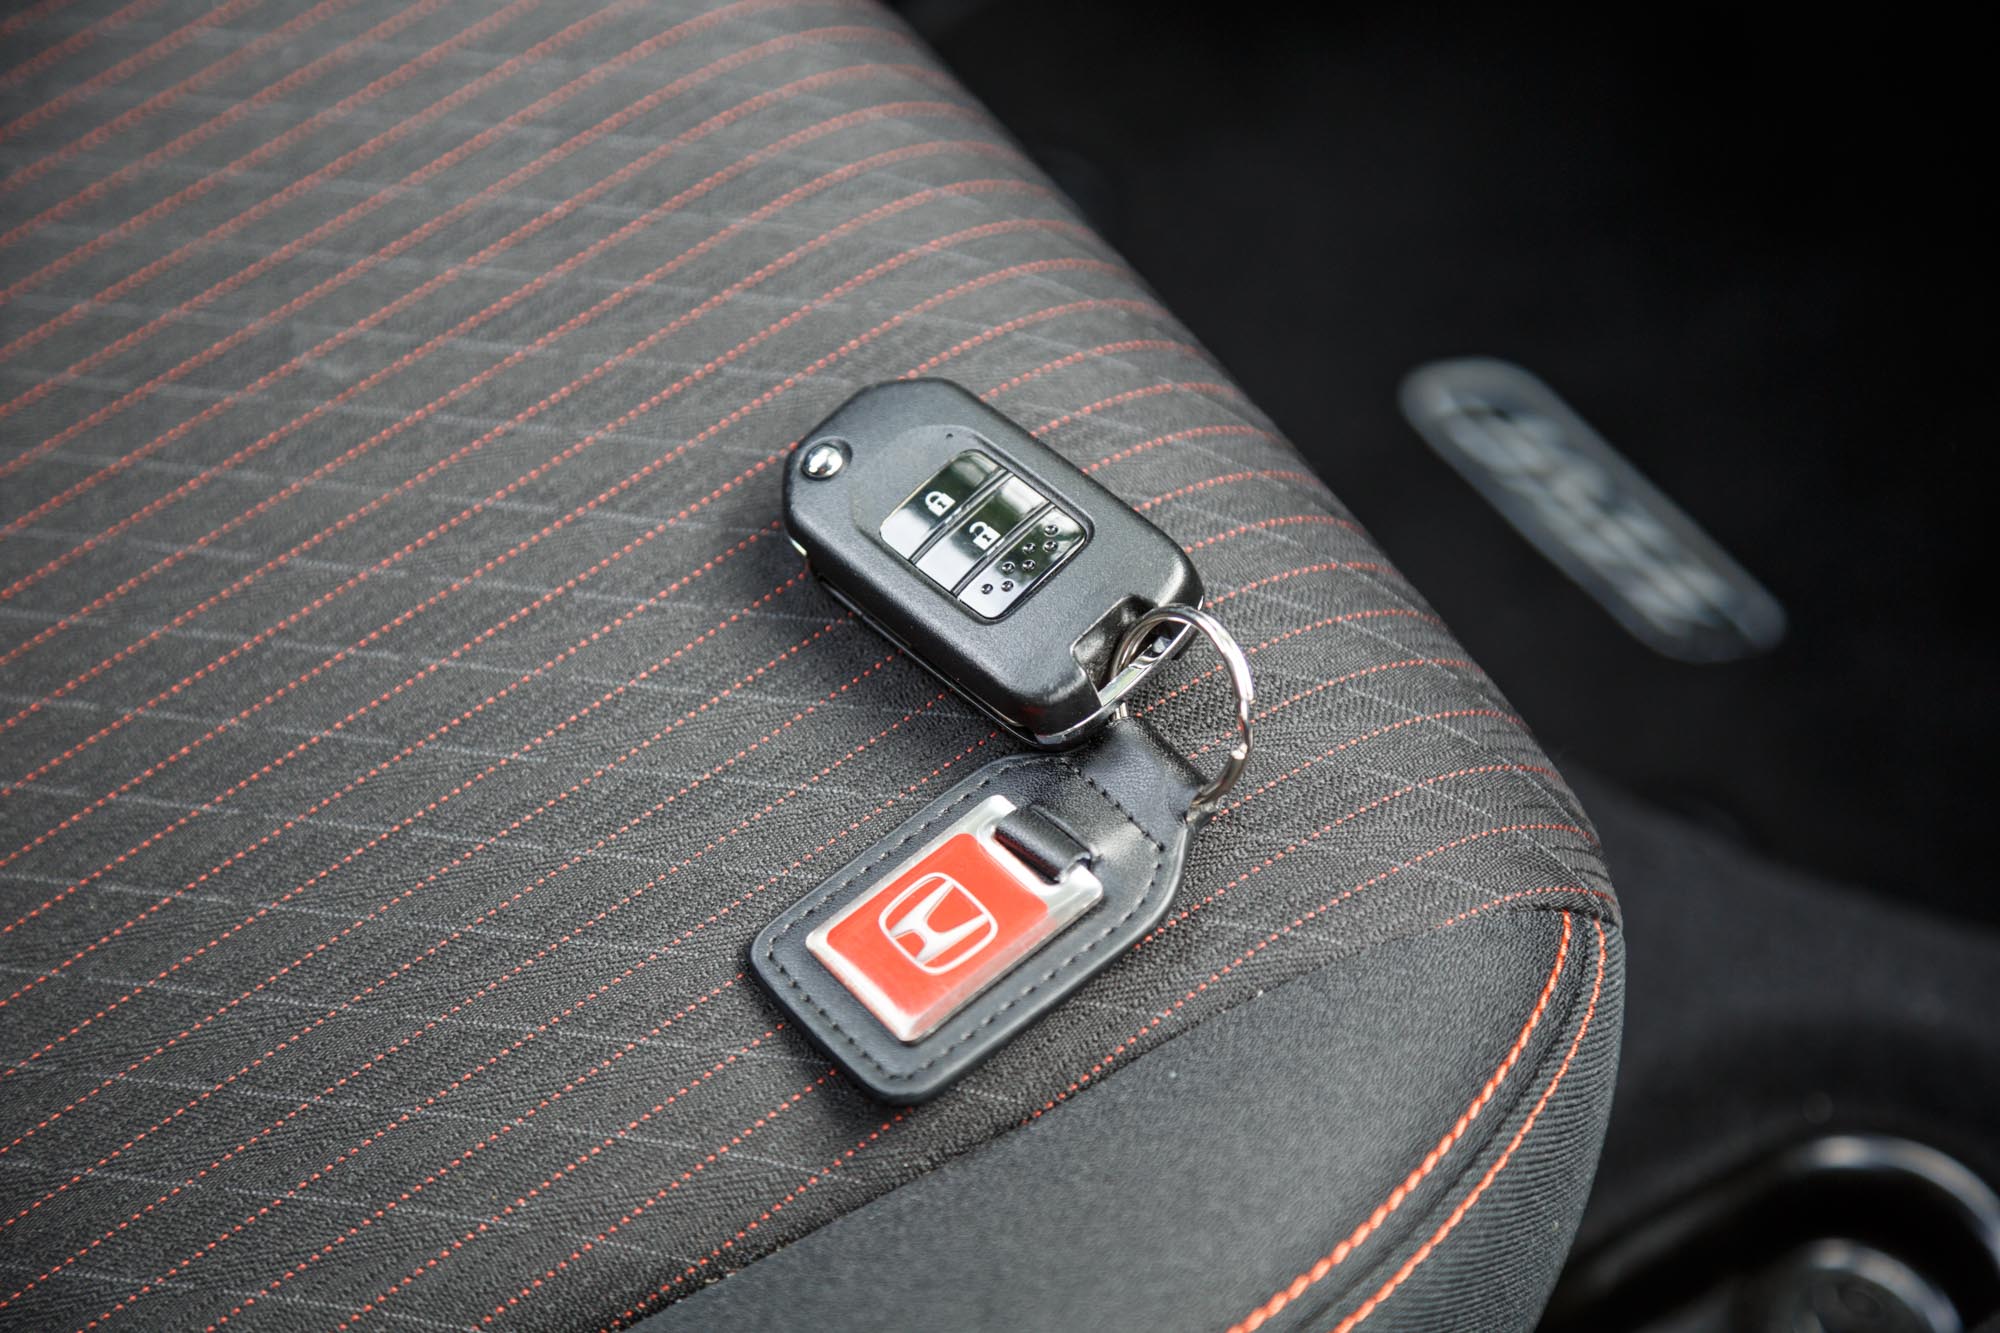 Does Home Depot Make Keys - Could They Duplicate Your Car Keys?